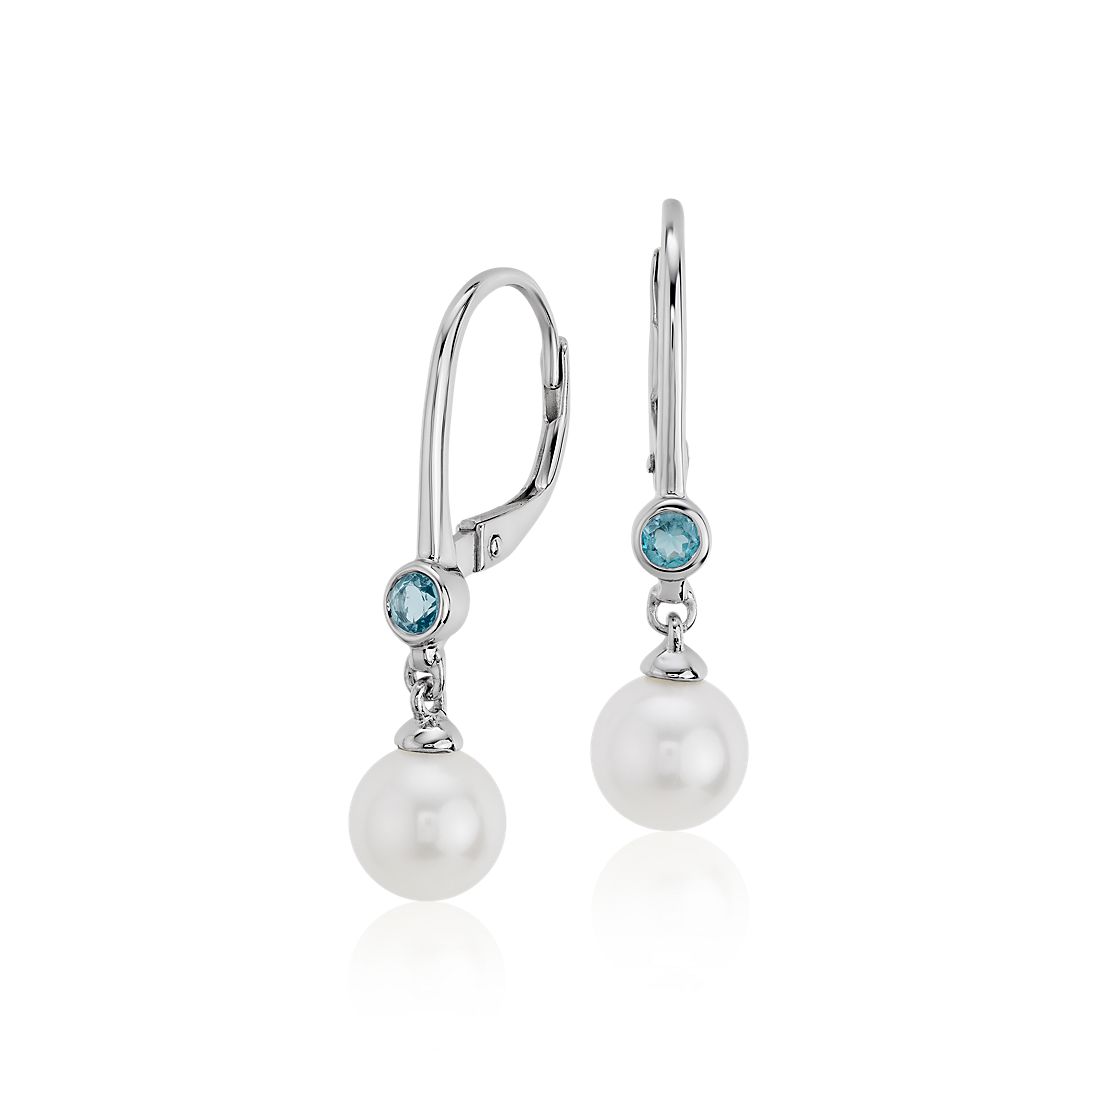 Freshwater Cultured Pearl and Blue Topaz Drop Earrings 14k White Gold (6.5mm)